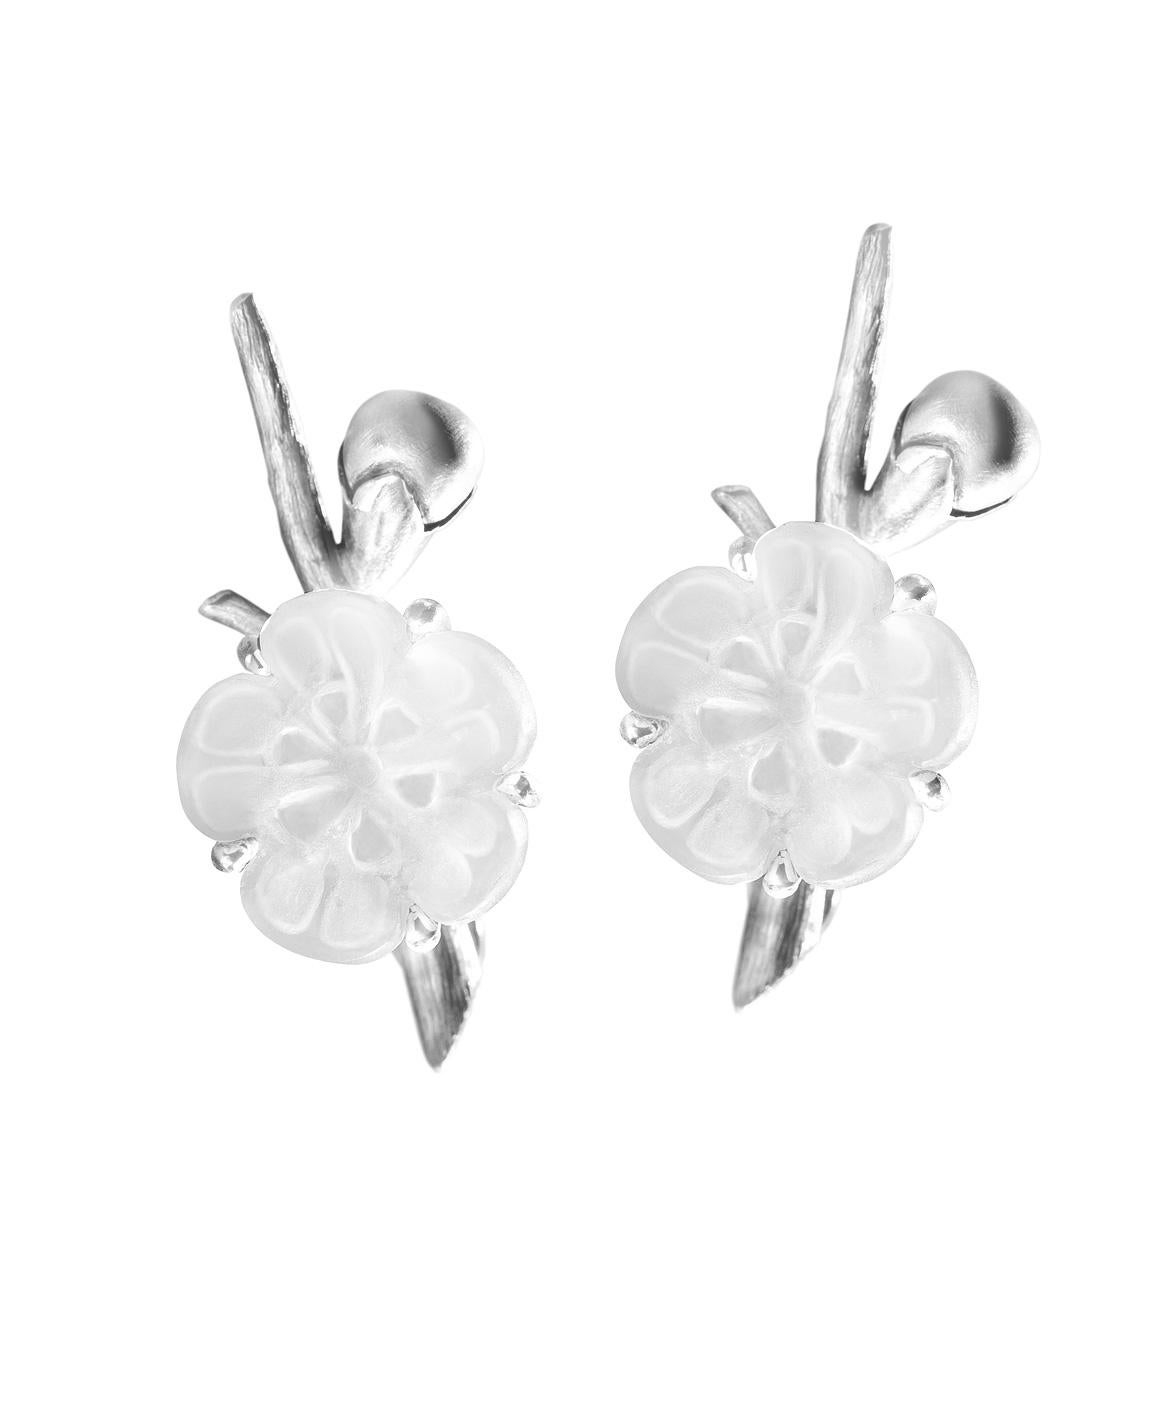 These contemporary sterling silver earrings are part of the Sakura collection, which was featured in Vogue UA magazine.

The design of these earrings is contemporary and adds a romantic touch with the frosted flowers of cherry blossom. The frosted